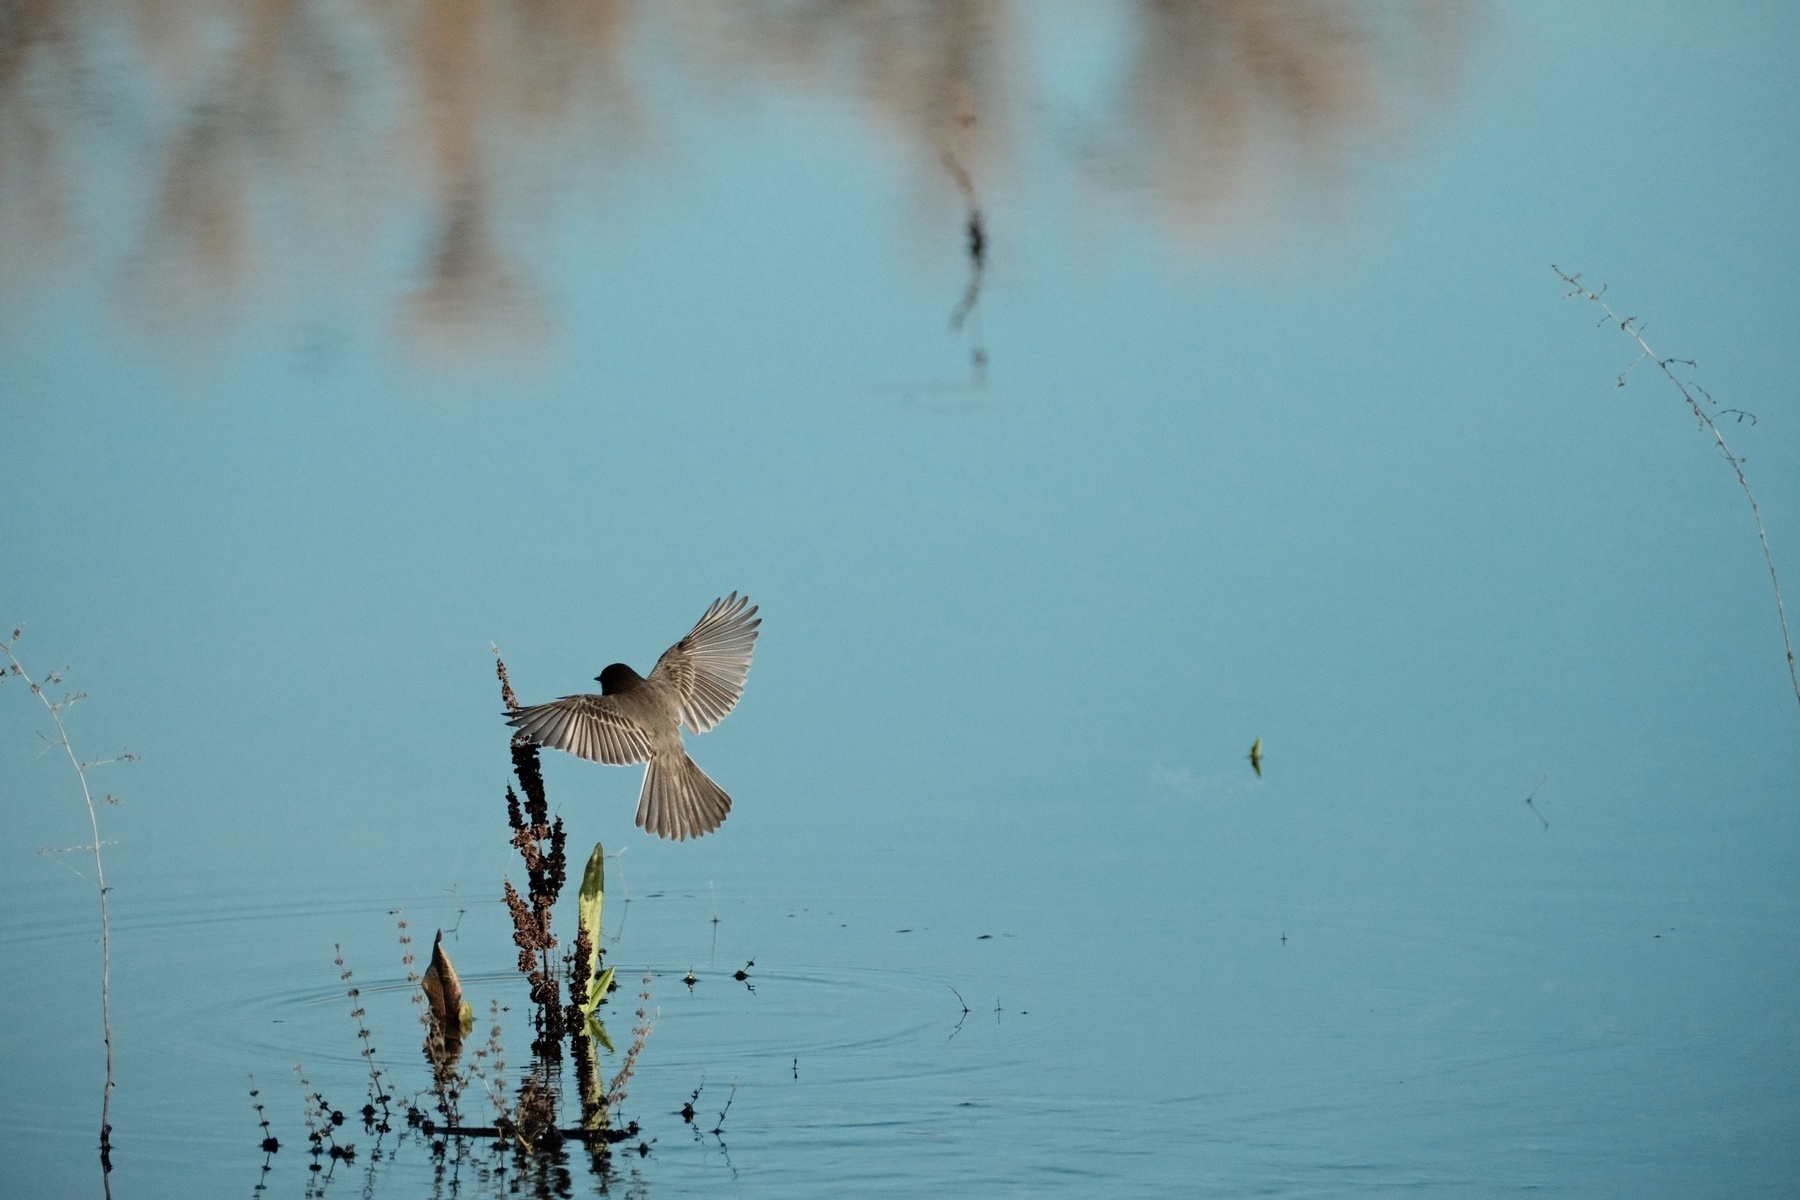 A Black Phoebe bird in mid-flight over a calm body of water with light ripples and reflections of vegetation on the surface.